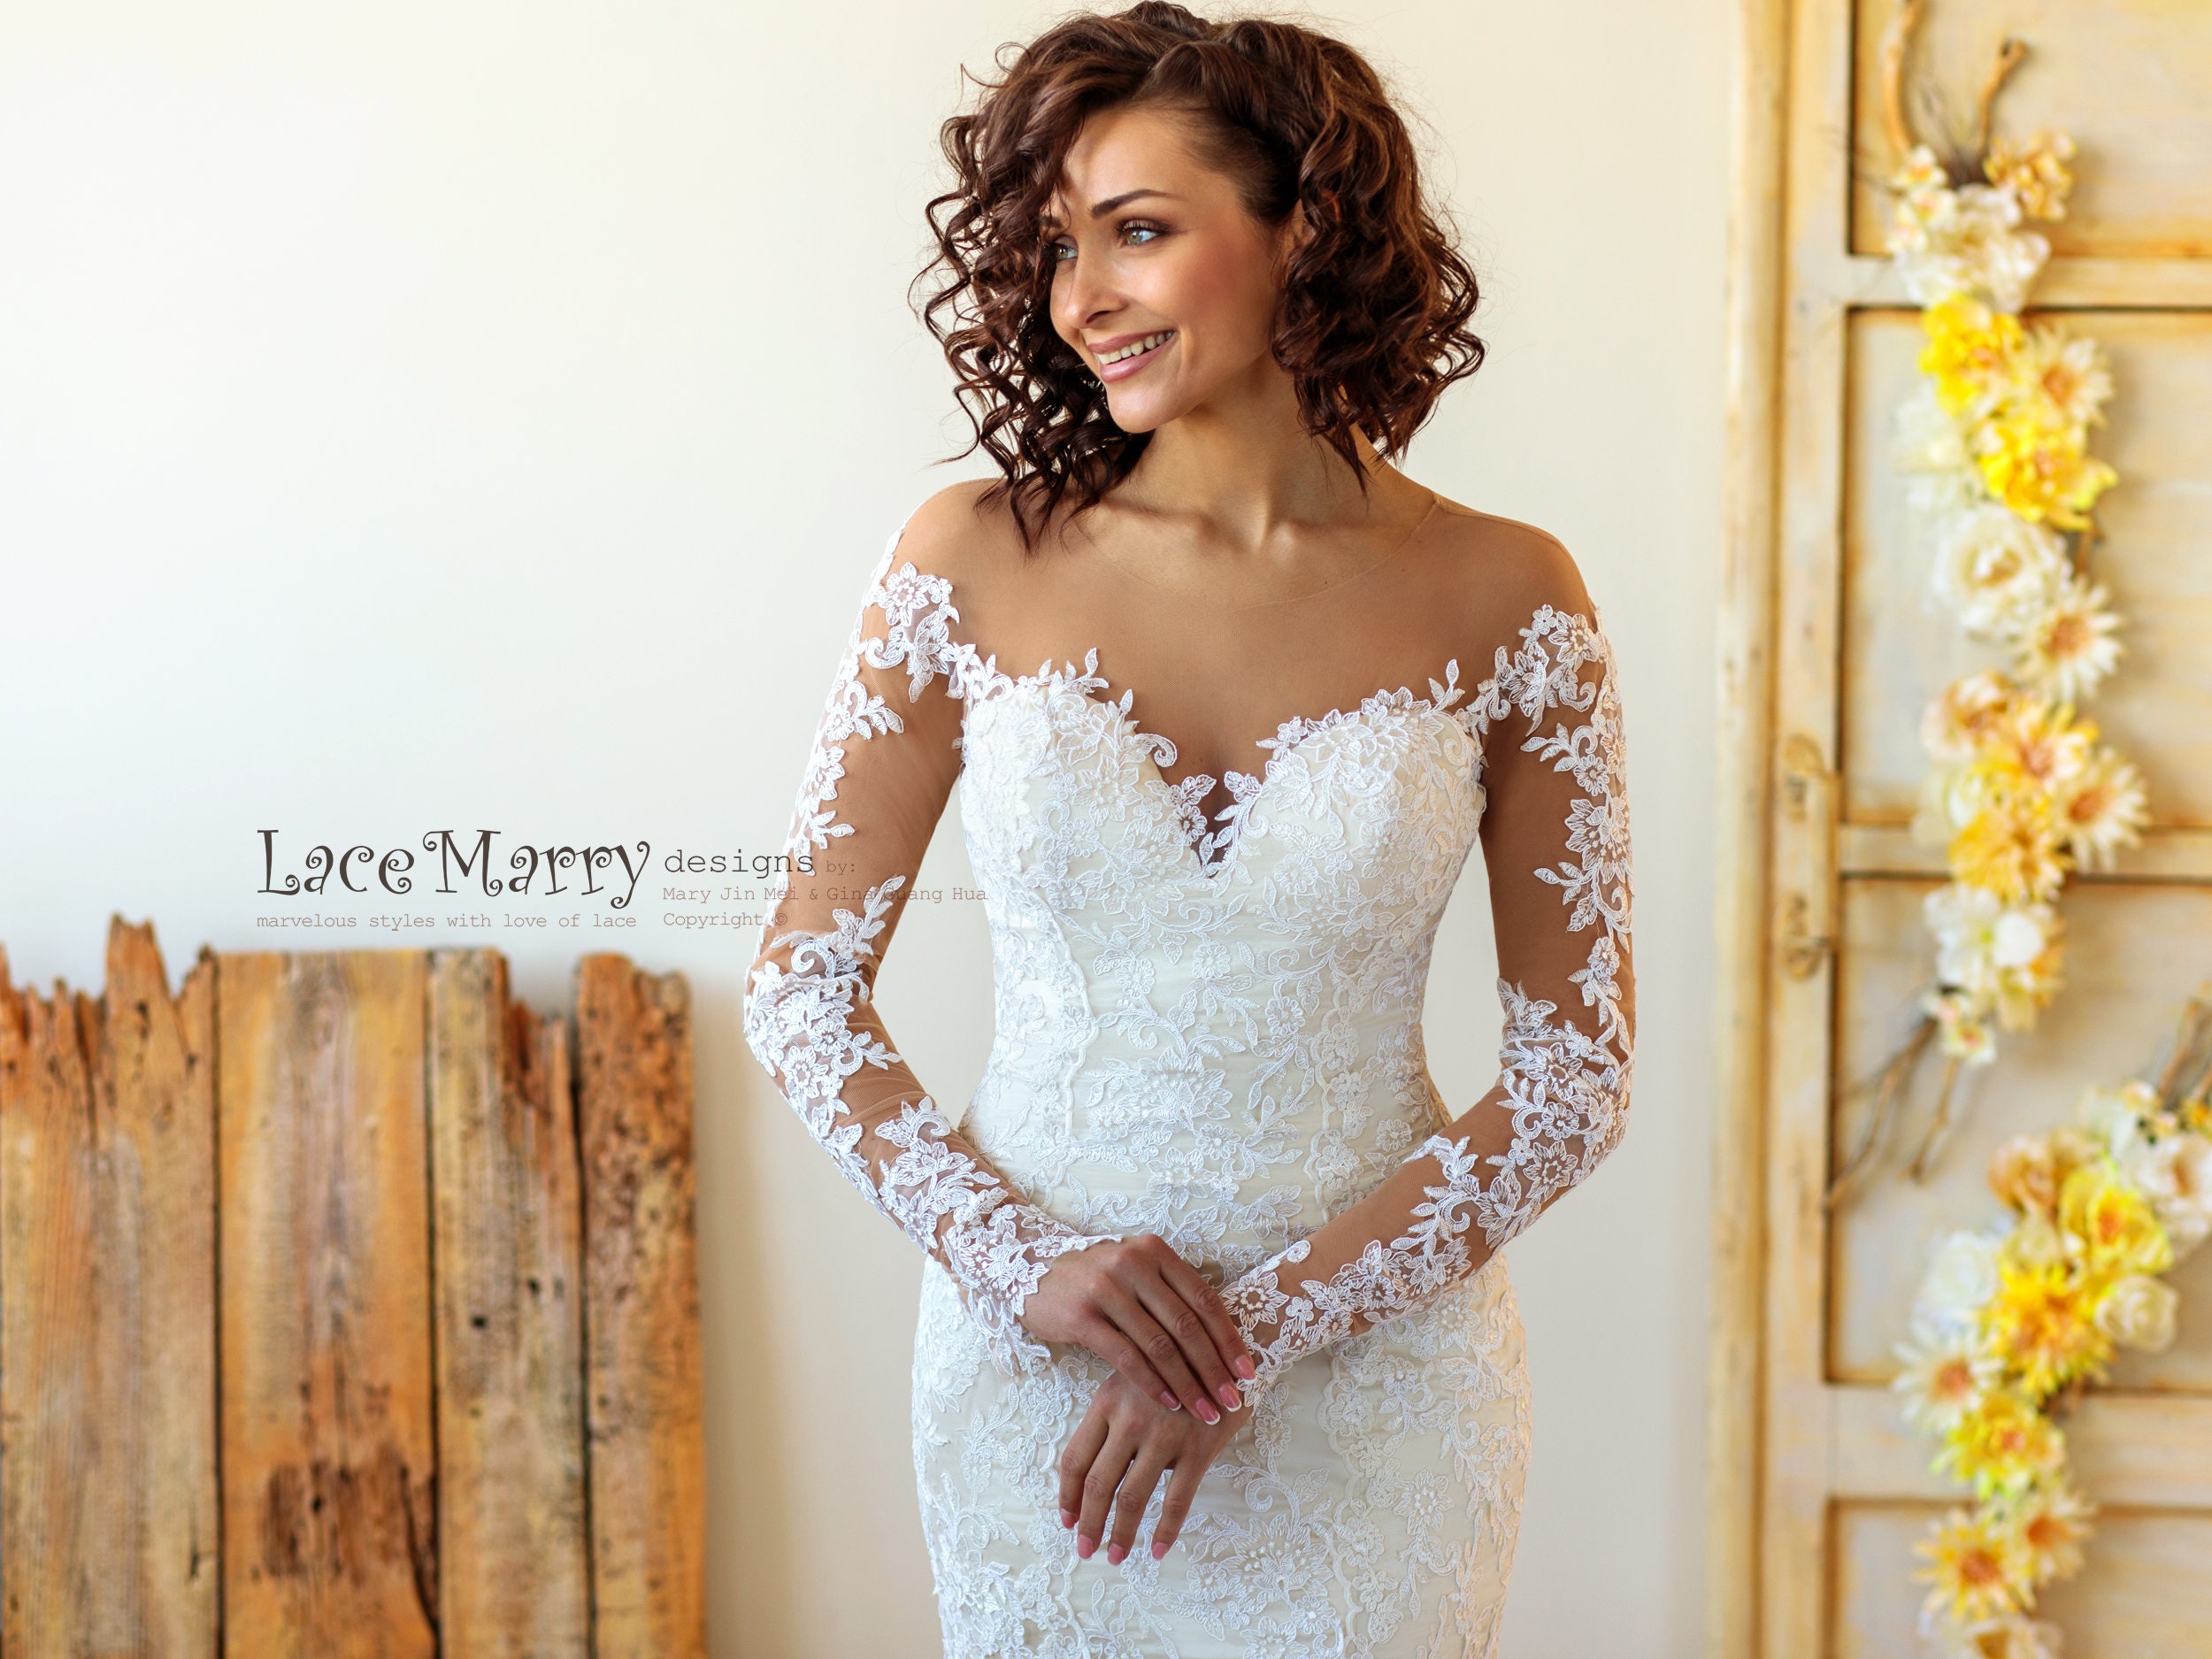 Exquisite Long Lace Sleeves Design Wedding Dress With Light